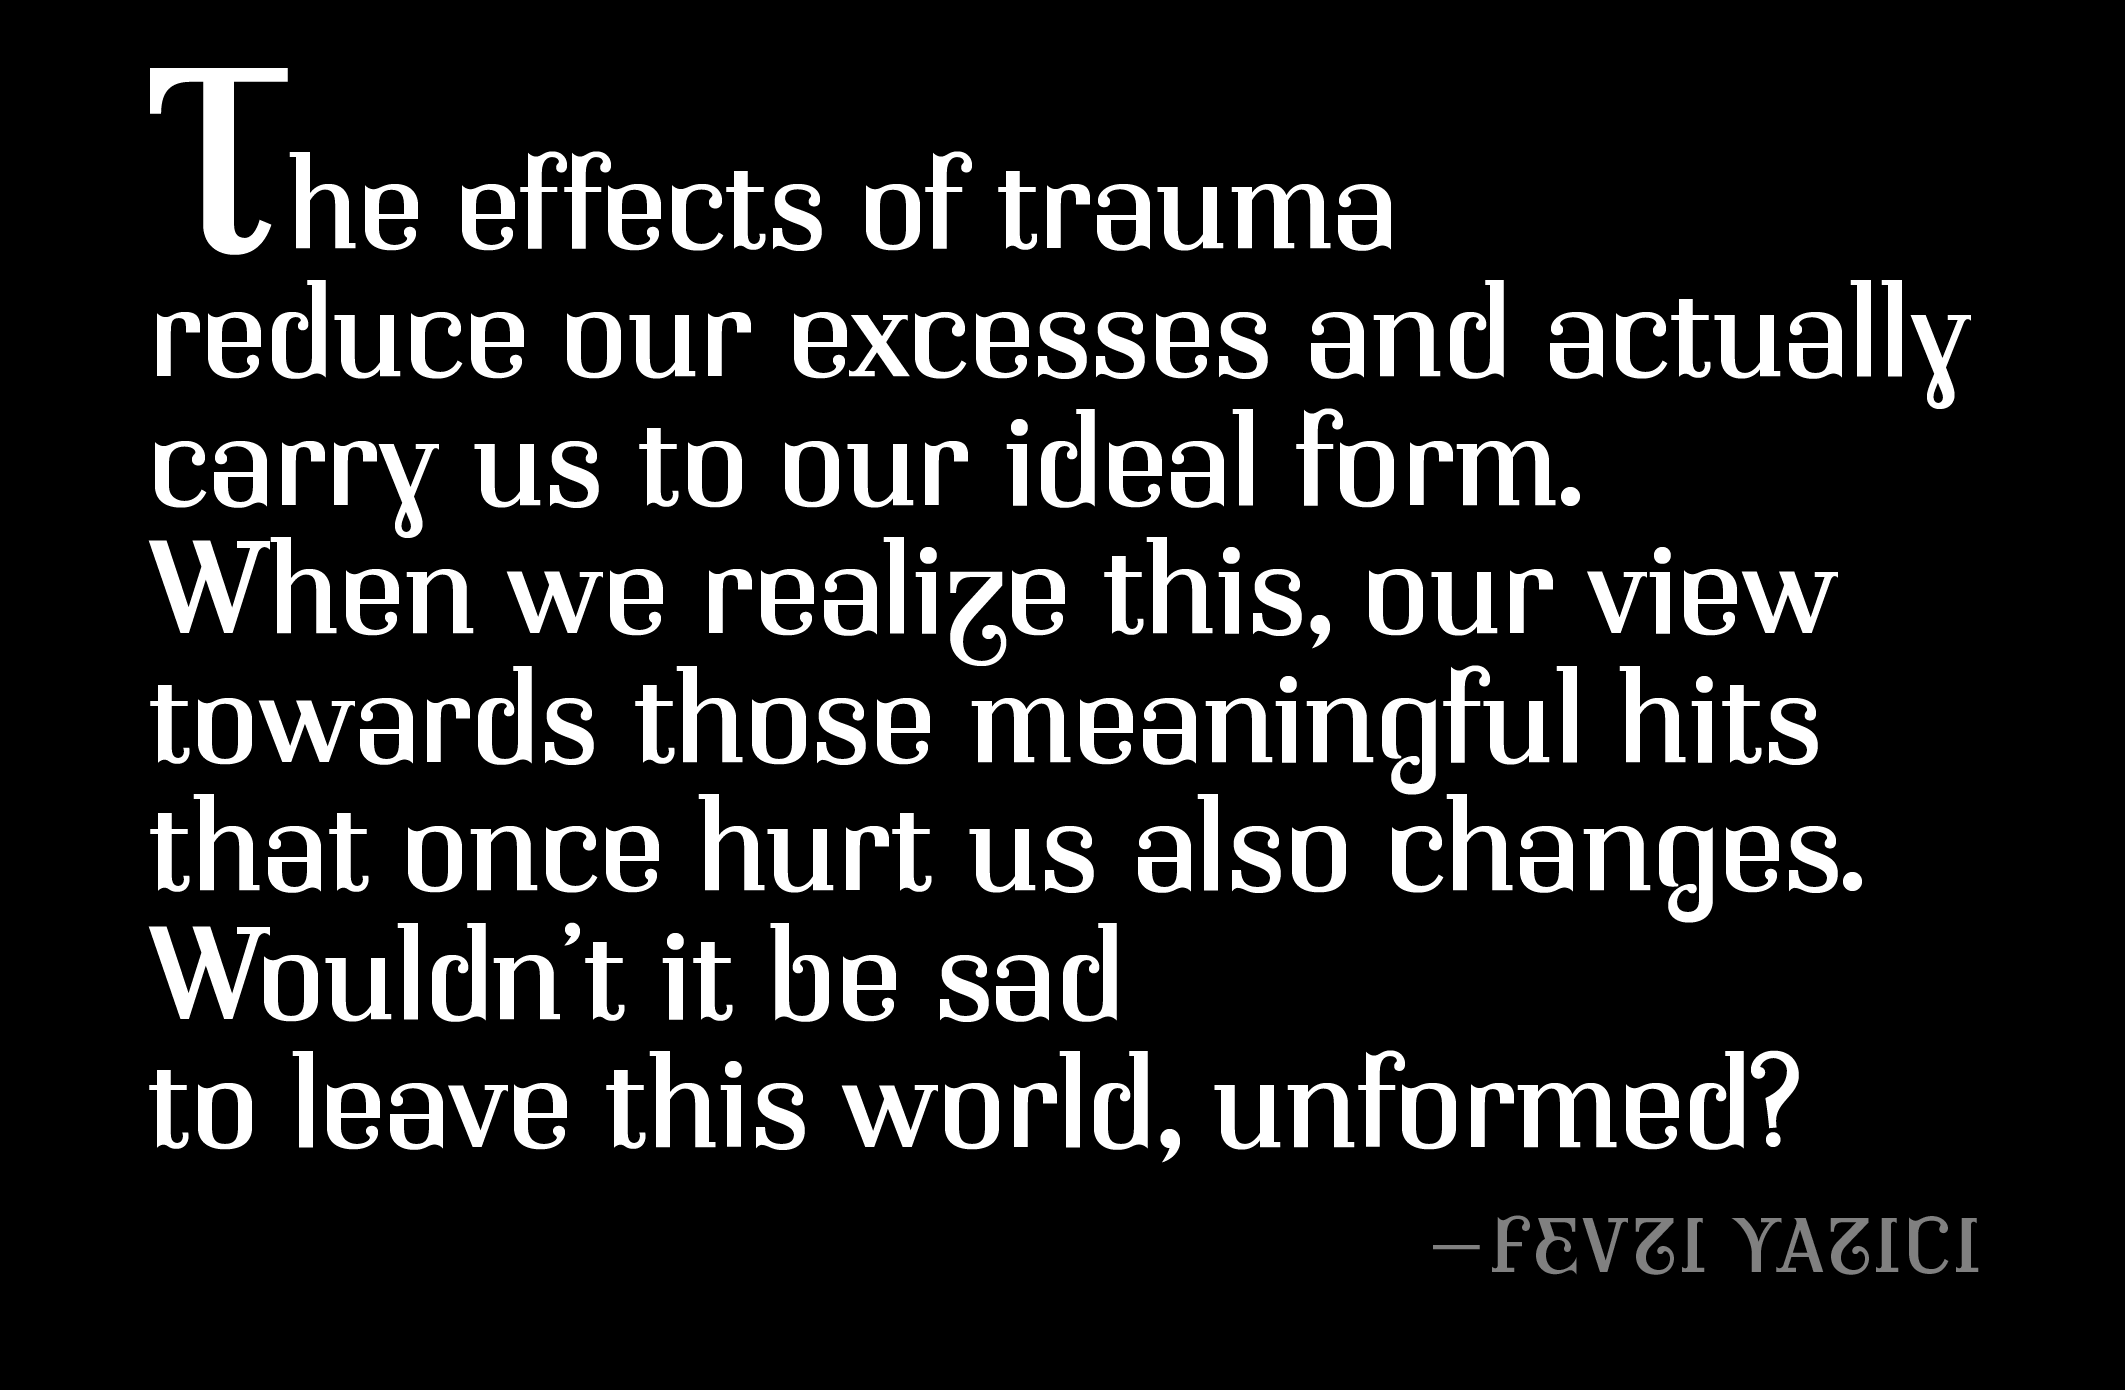 “The effects of trauma reduce our excesses and actually carry us to our ideal form. When we realize this, our view towards those meaningful hits that once hurt us also changes.
“Wouldn’t it be sad to leave this world, unformed?”
–Fevzi Yazıcı